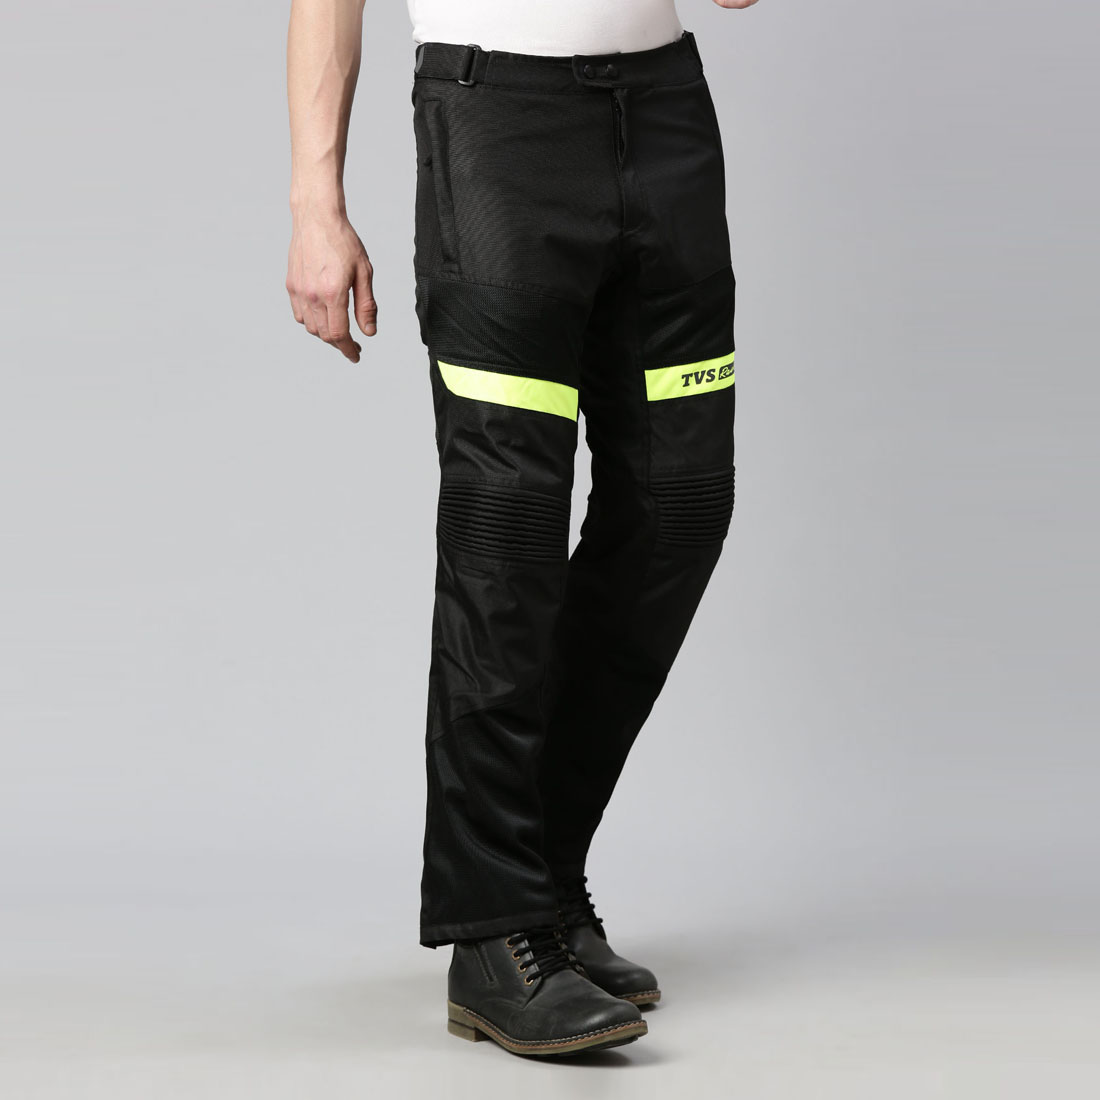 MILLER – STREET MESH RIDING PANTS WITH LINERS – ViaTerra Gear